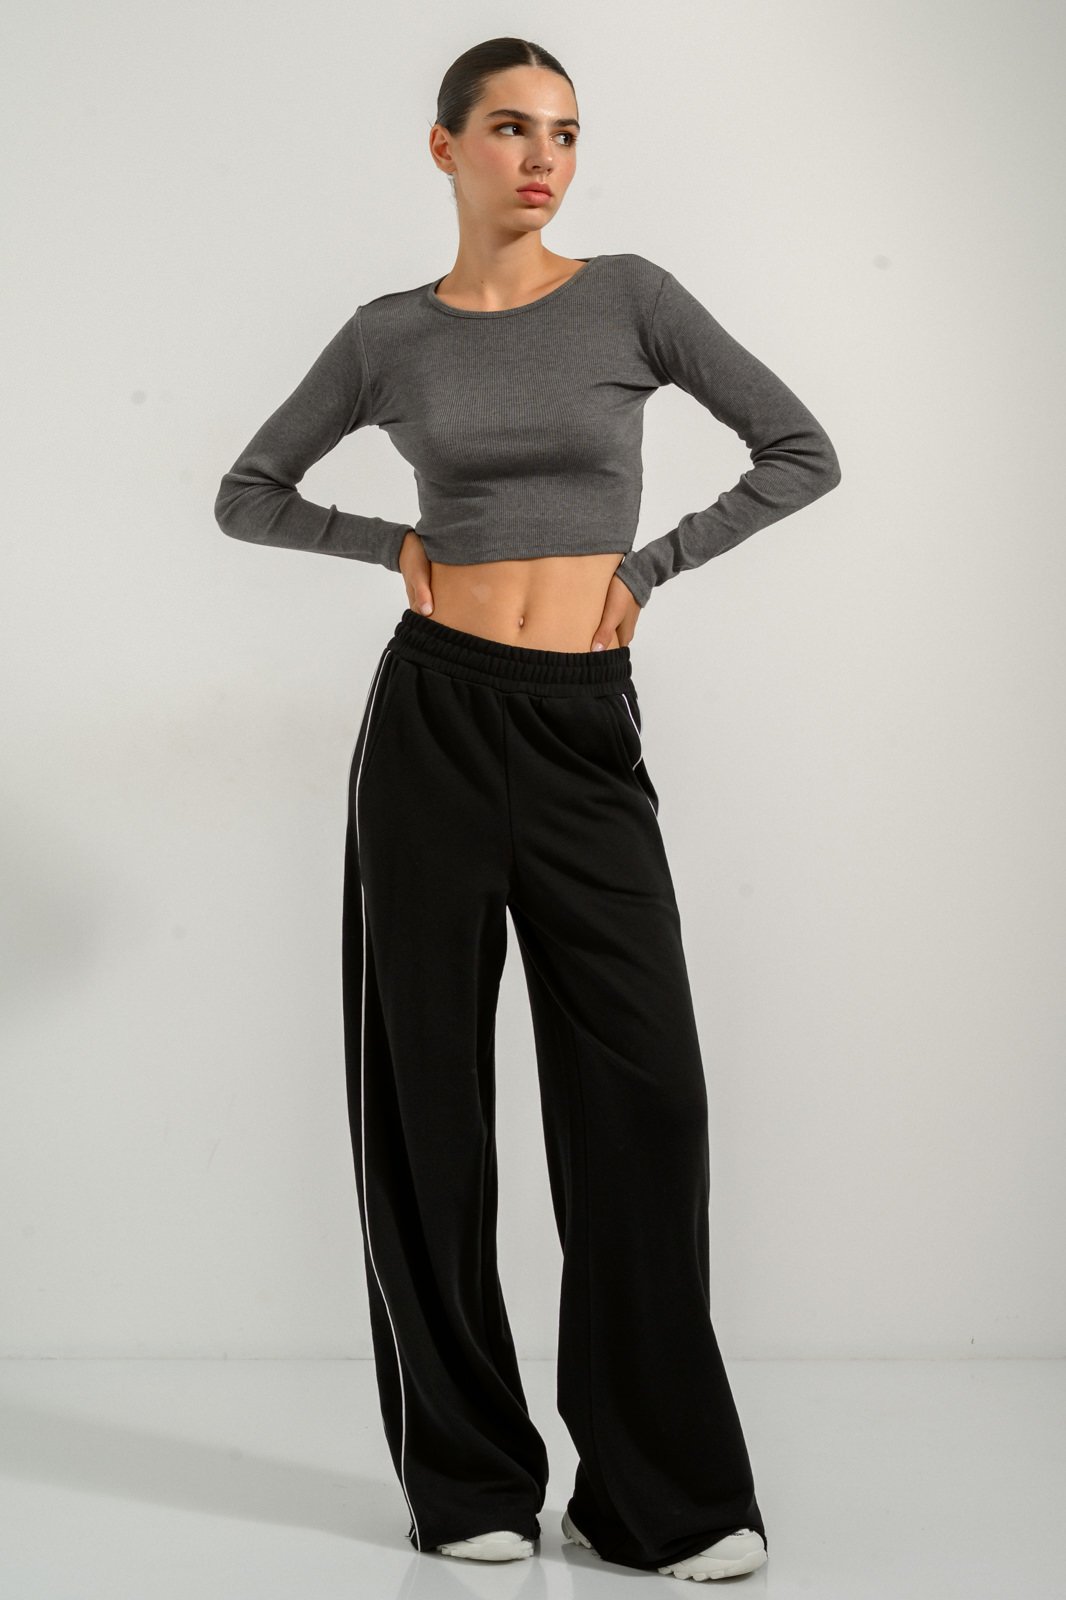 This crop top with high-waisted loose striped pants